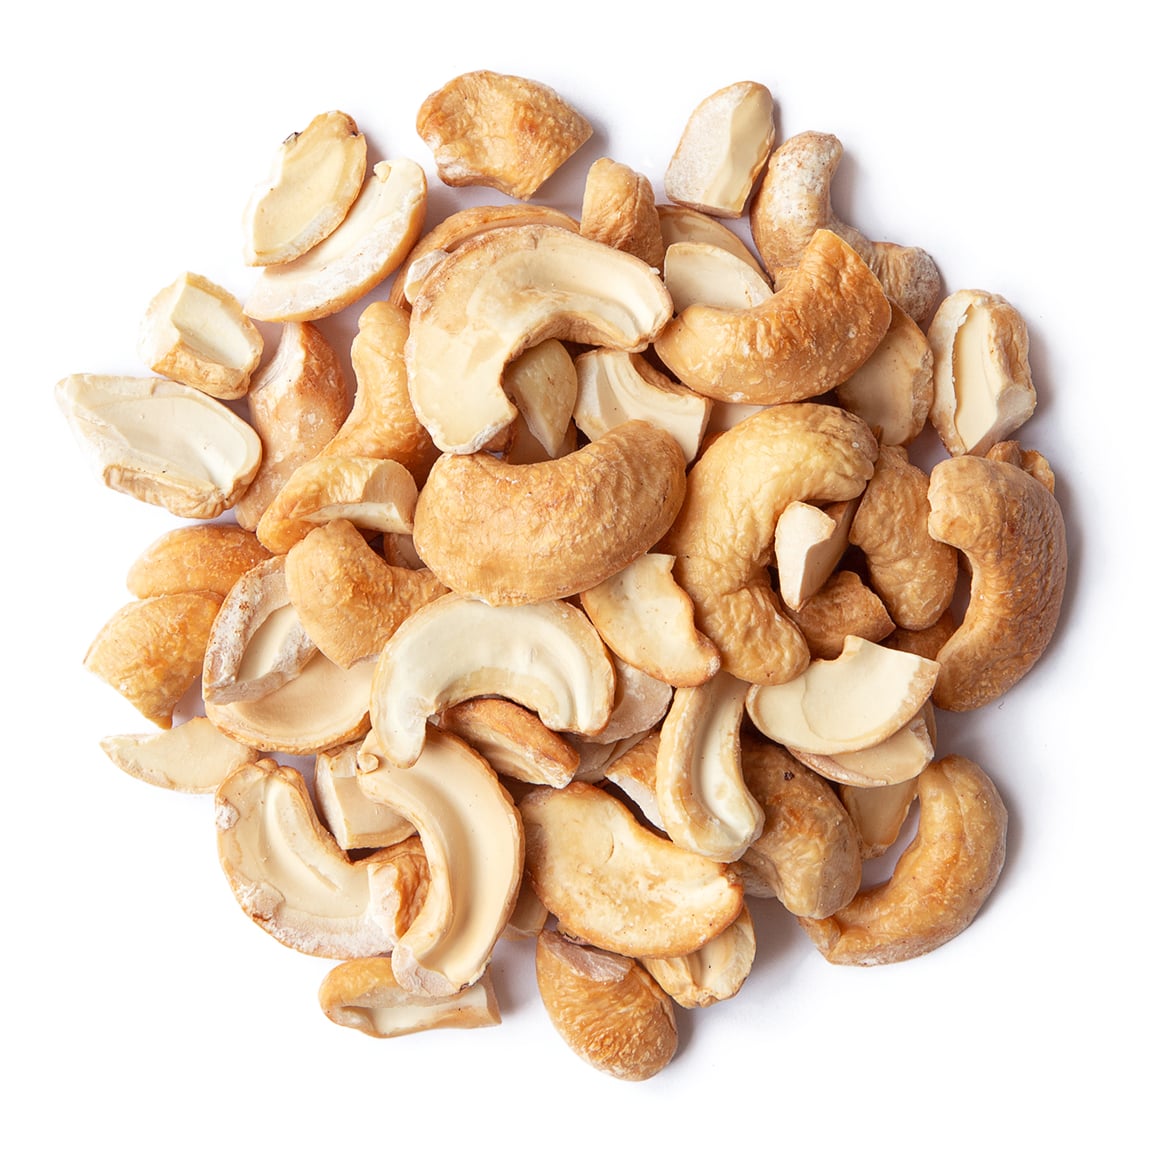 dry-roasted-cashew-halves-and-pieces-main-min